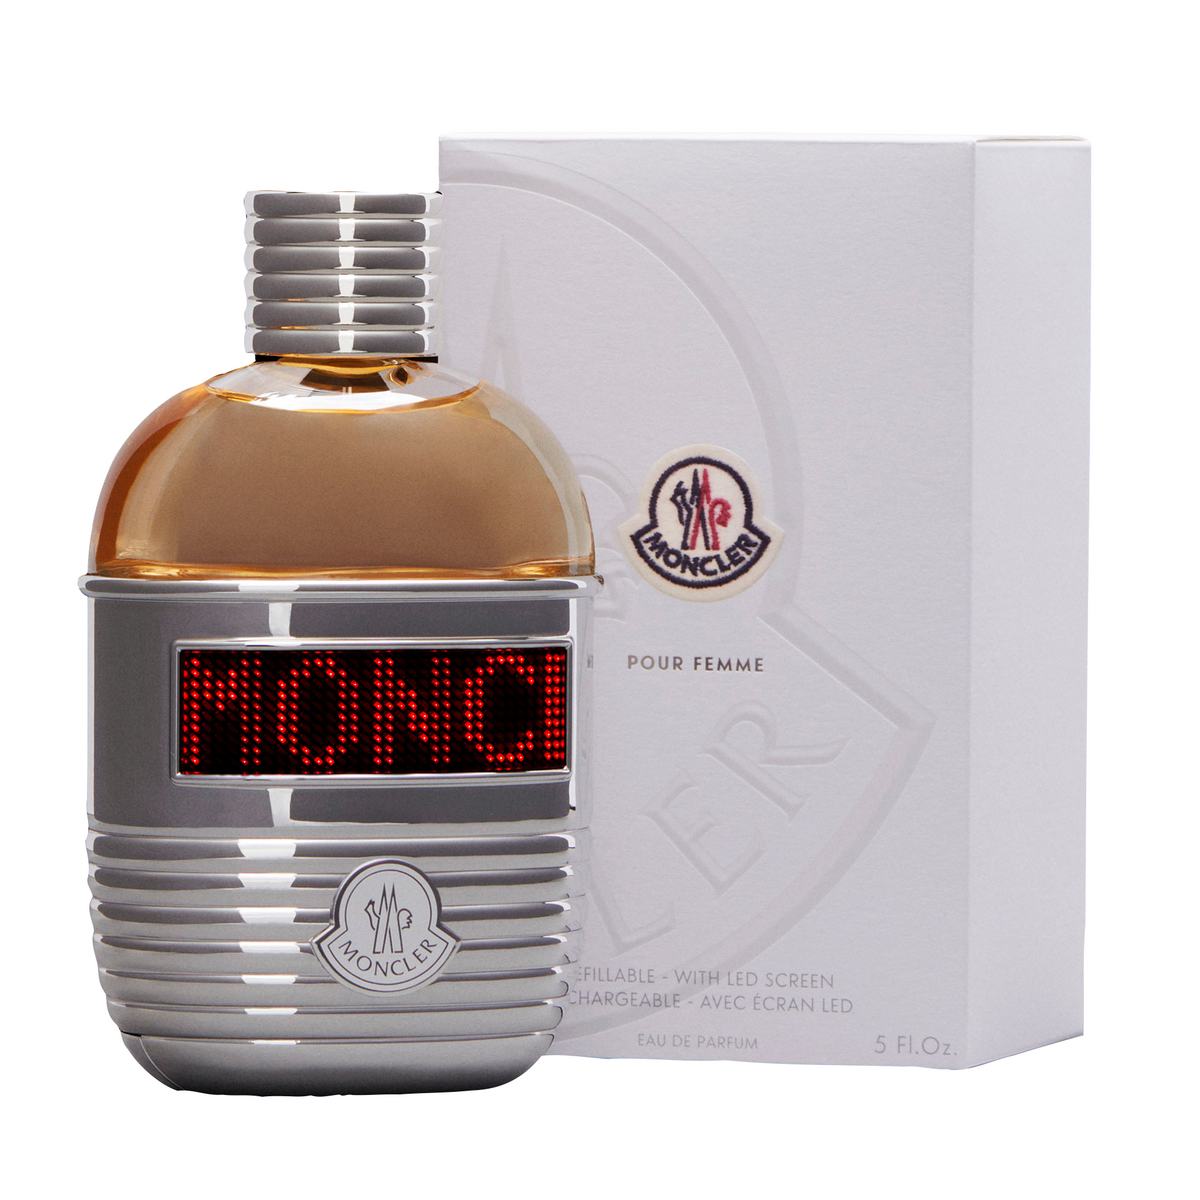 Moncler Pour Femme Perfume For Women EDP 150ml Refillable With Led Scr ...